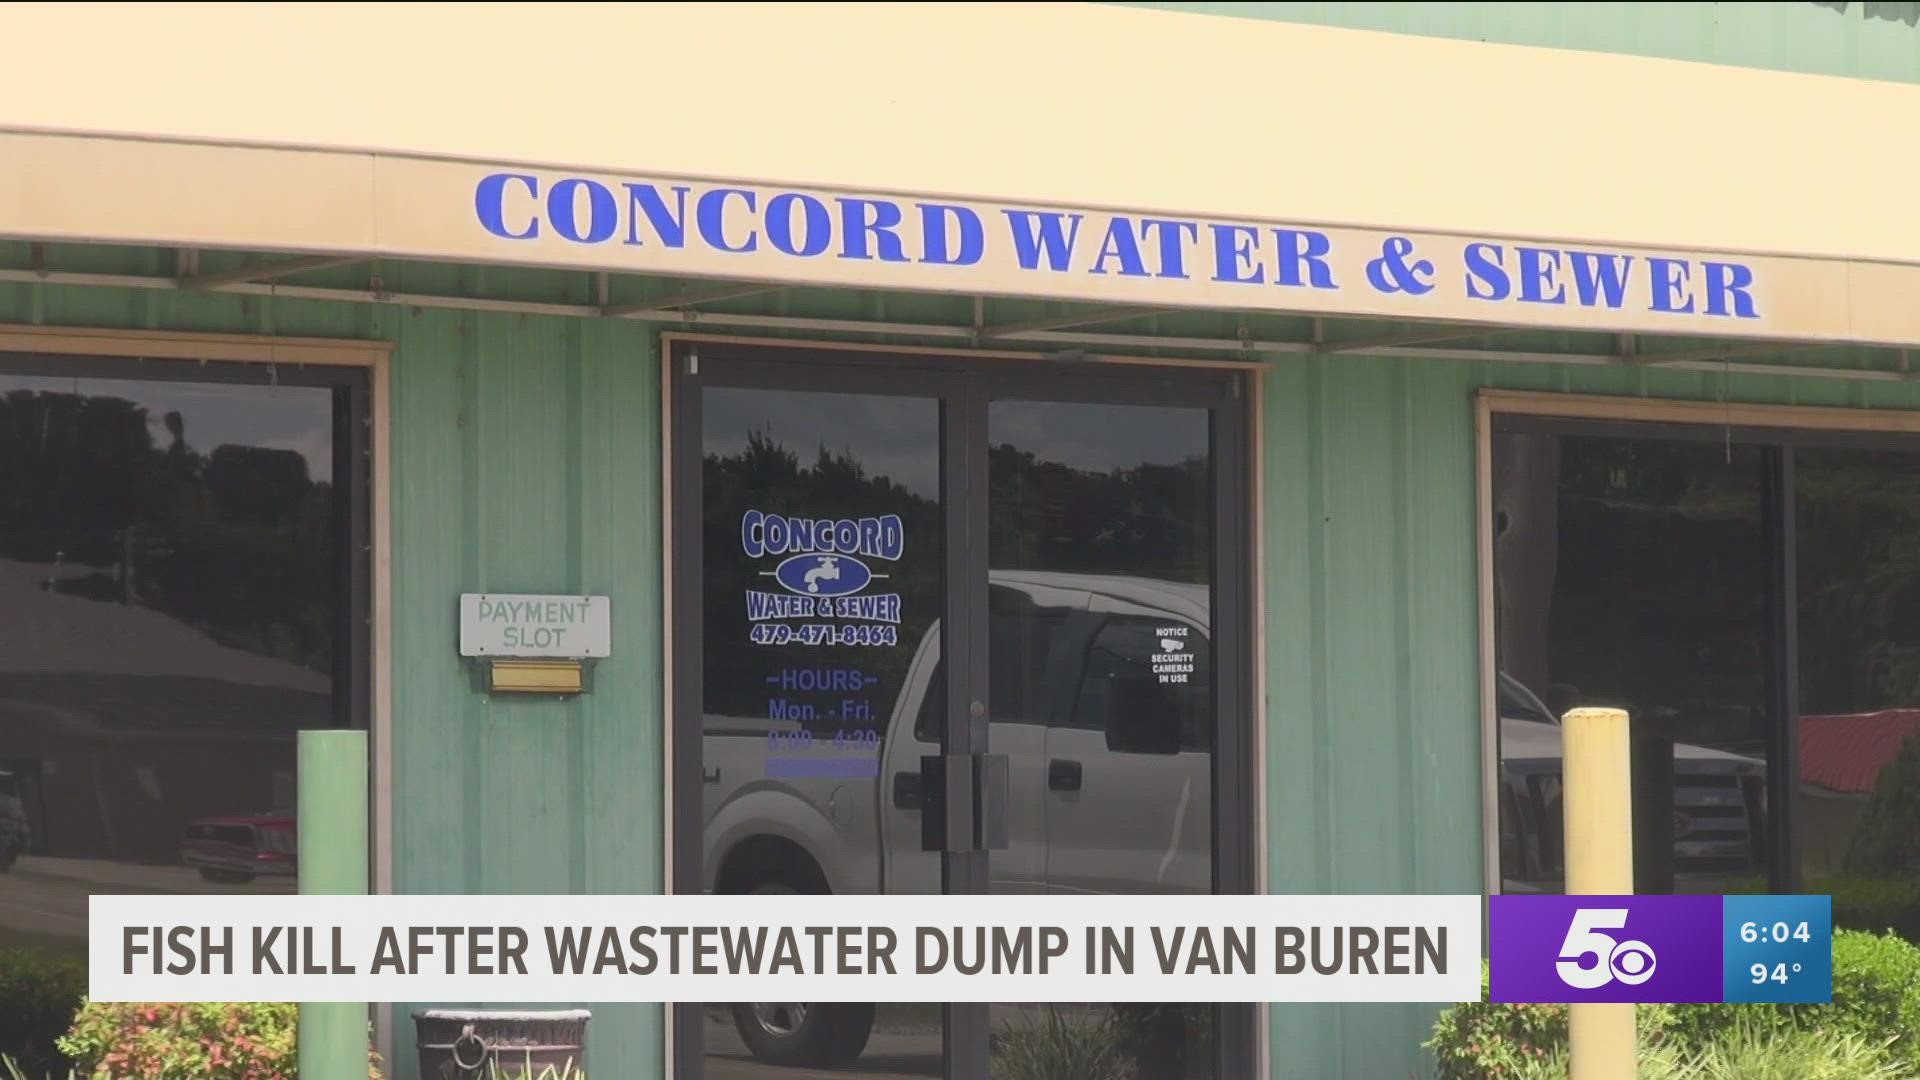 According to Arkansas Game and Fish, a leak from the Concord Water Supply in Van Buren was detected on Wednesday, Aug. 11.